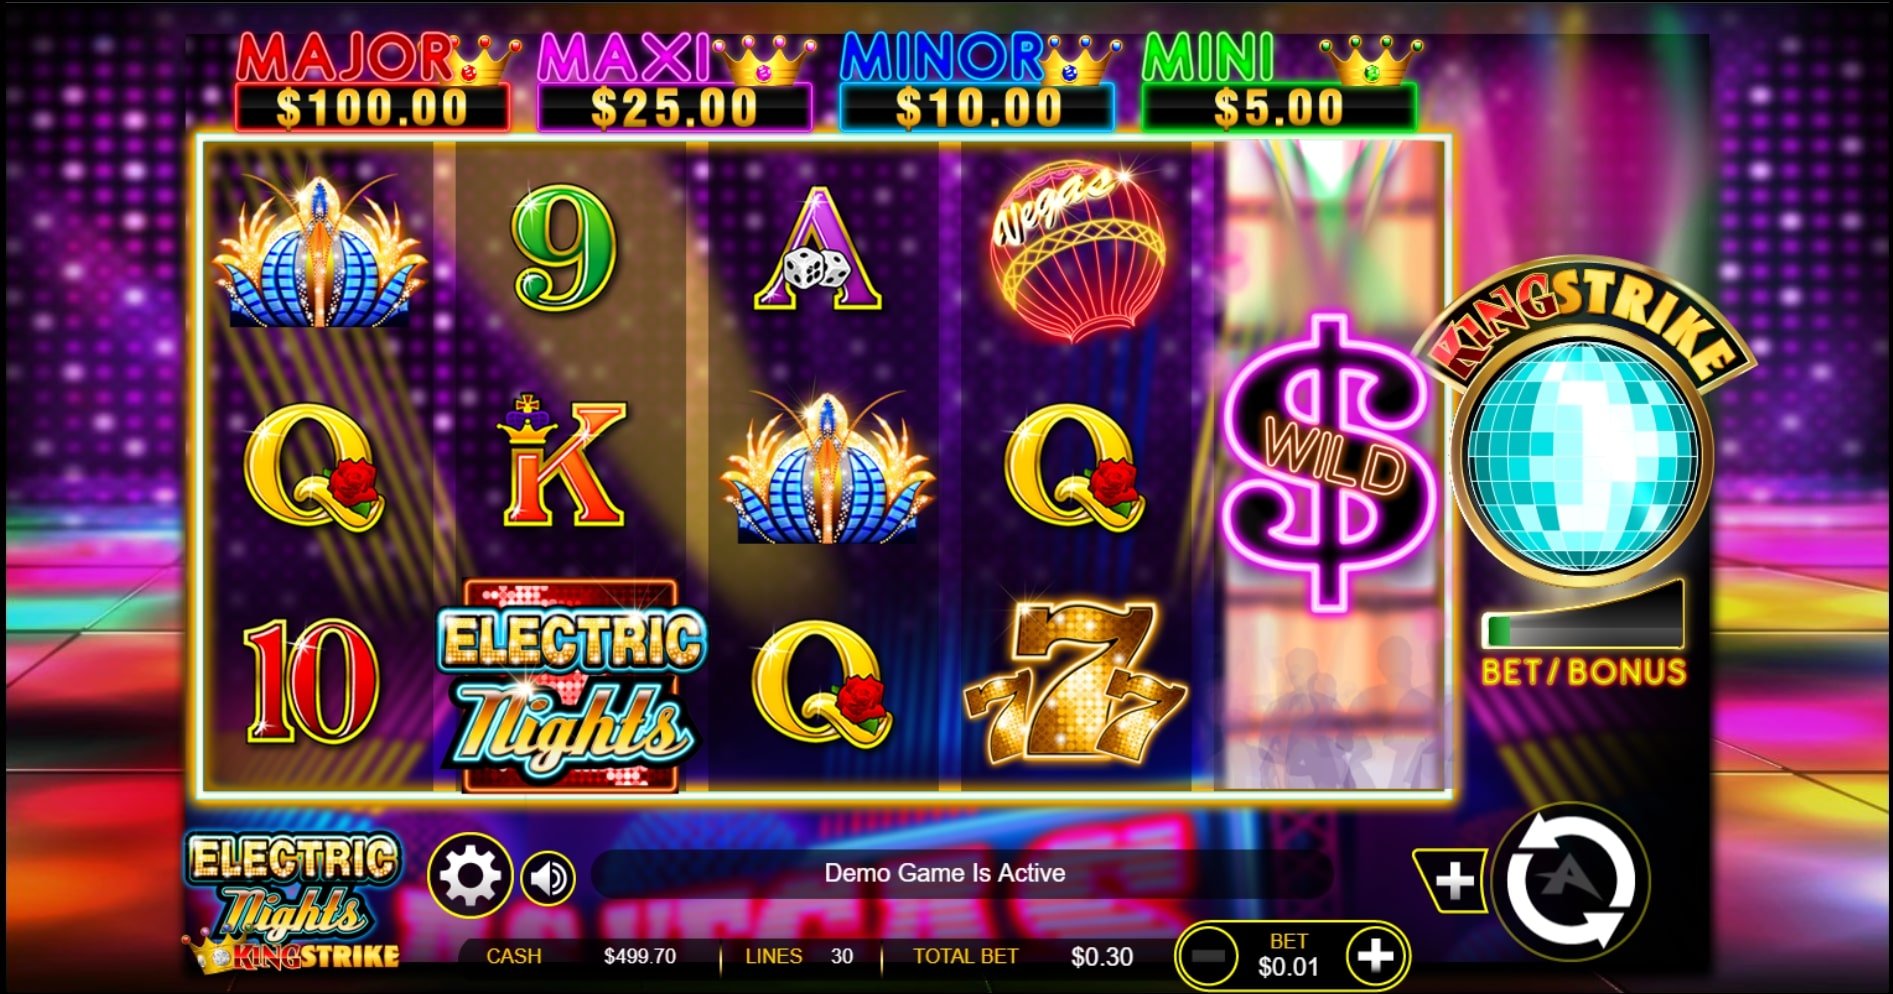 Electric Nights King Strike slot screenshot of demo game with colorful gameplay.